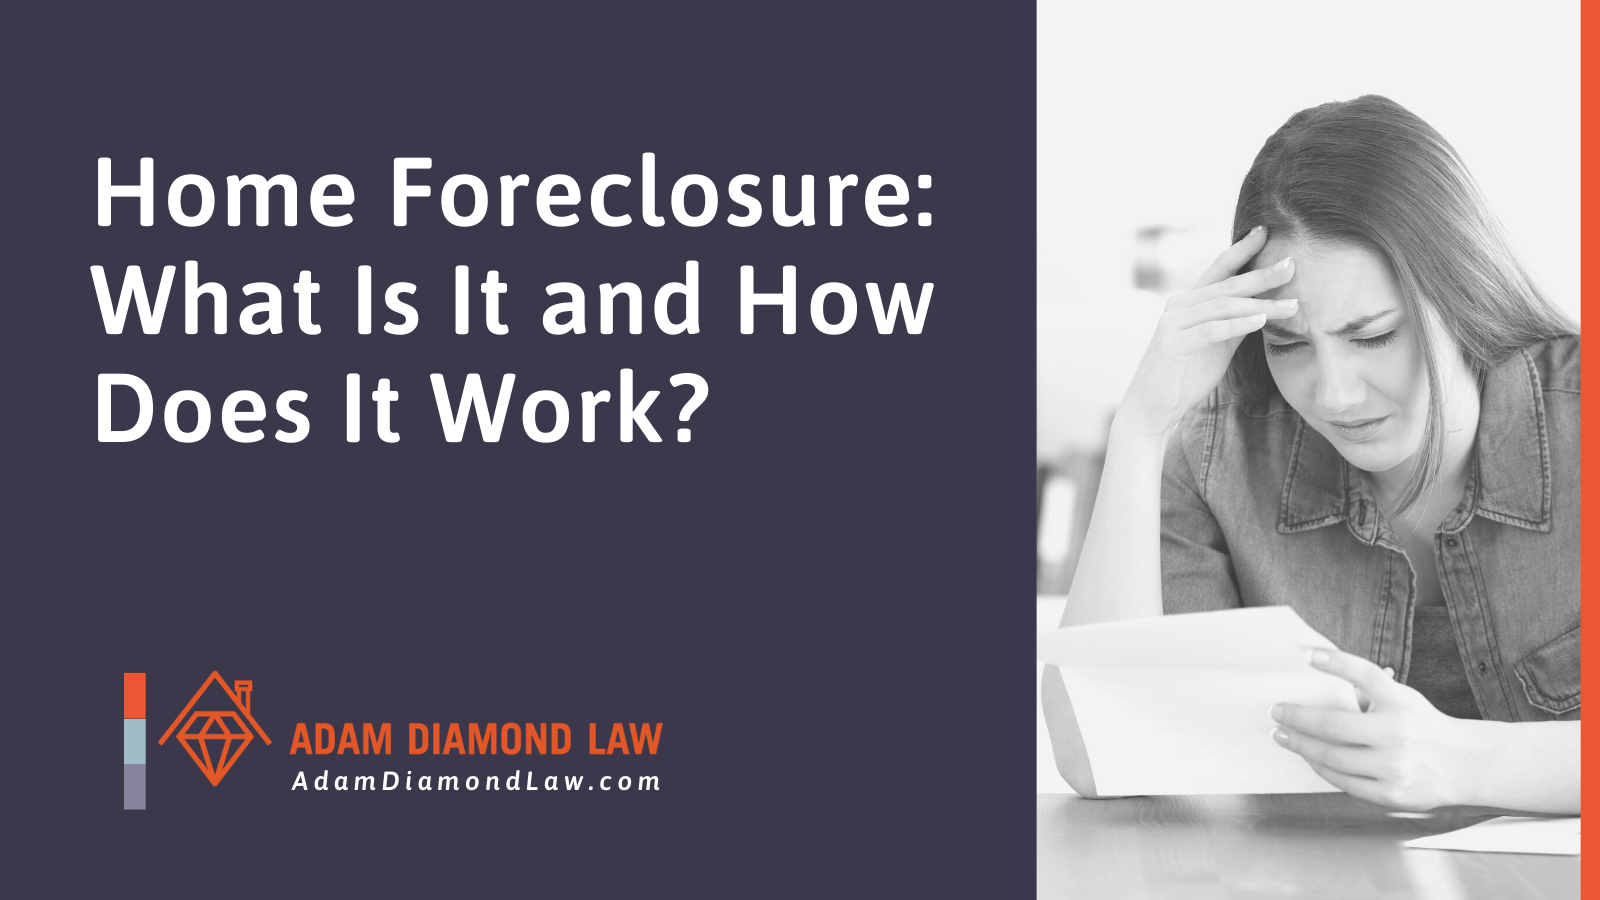 Home Foreclosure: What Is It and How Does It Work? - Adam Diamond Law | McHenry, IL Residential Real Estate Lawyer